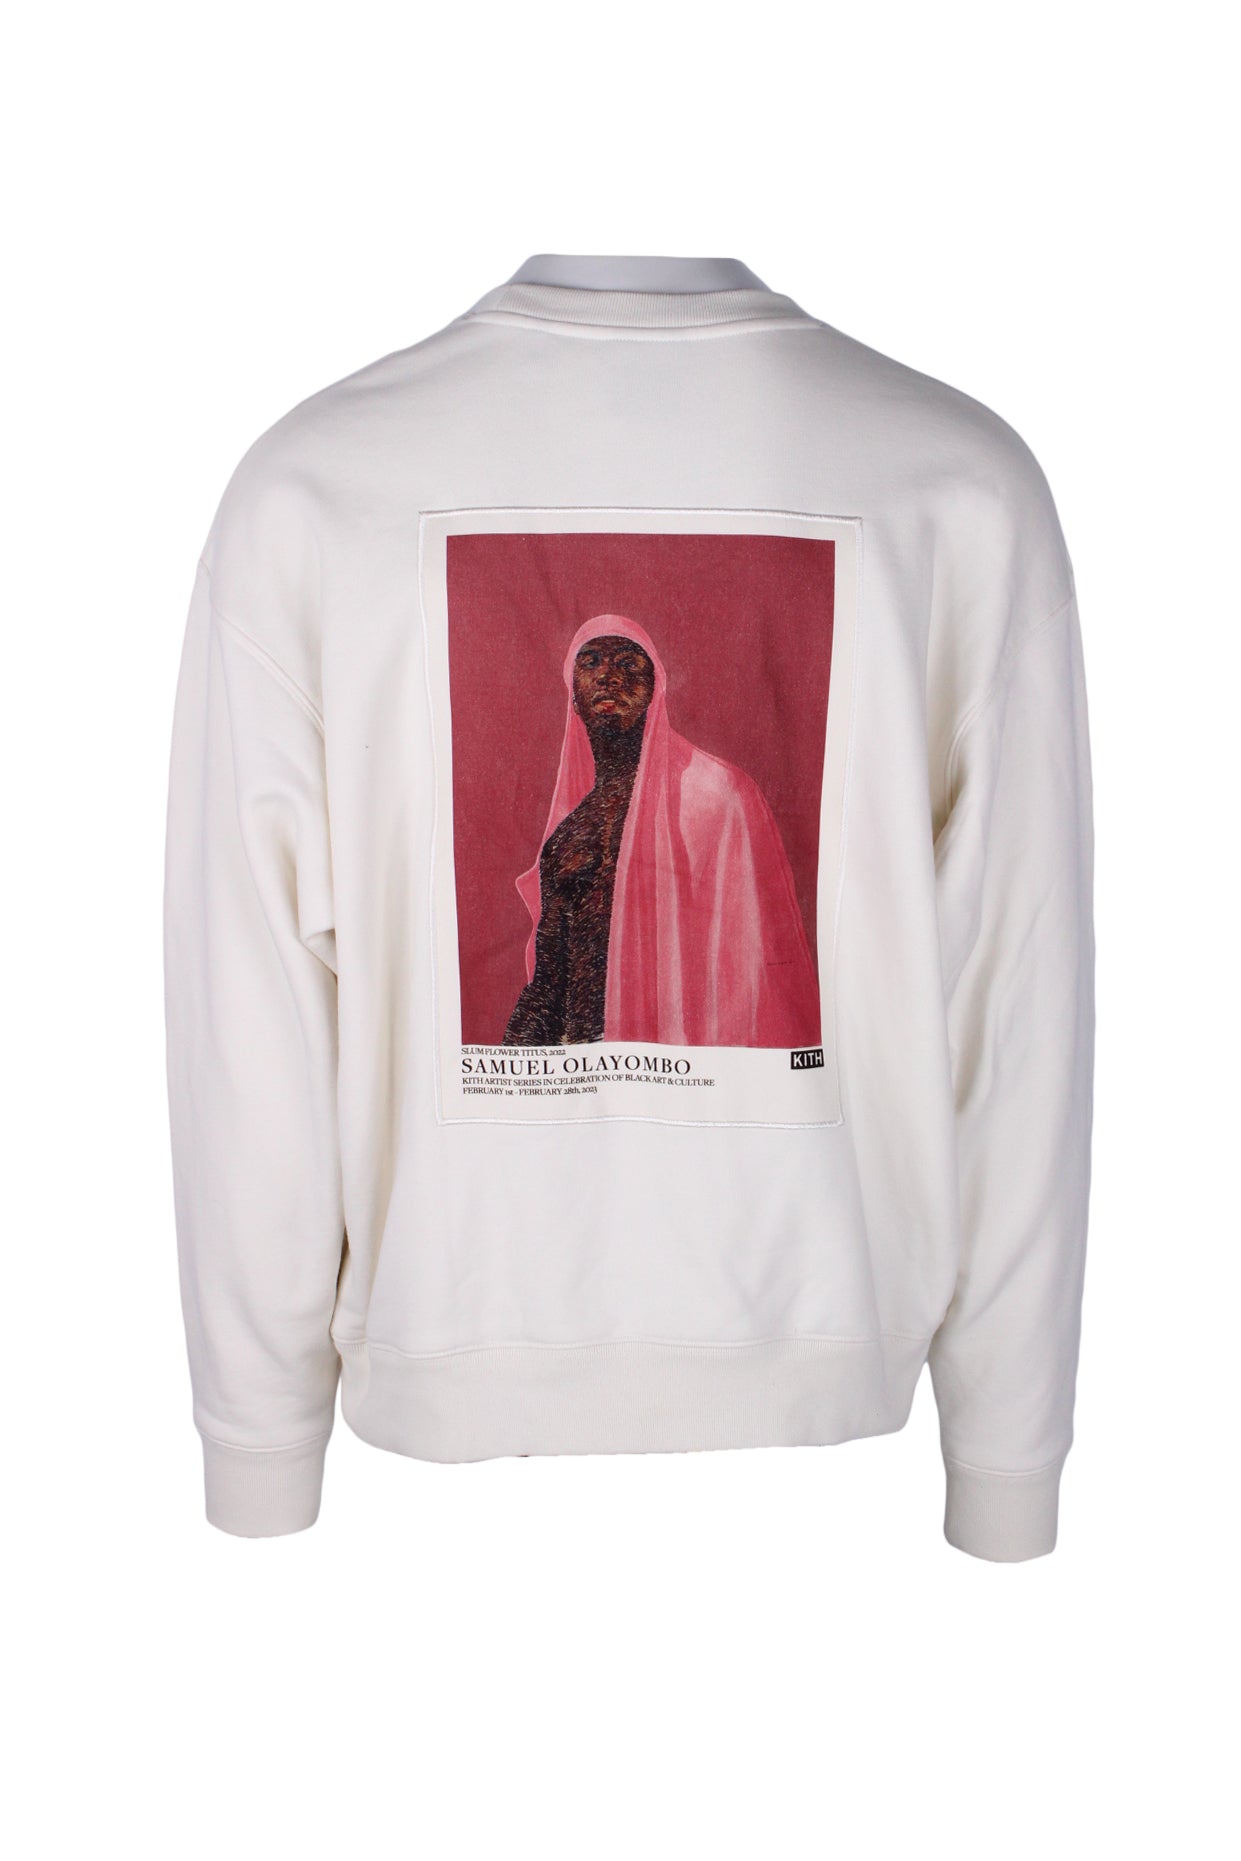 rear view with ‘slum flower titus, 2022. samuel olayombo. kith artist series in celebration of black art & culture. february 1st - february 28th, 2023. kith’ painting graphic patch at back of sweatshirt.